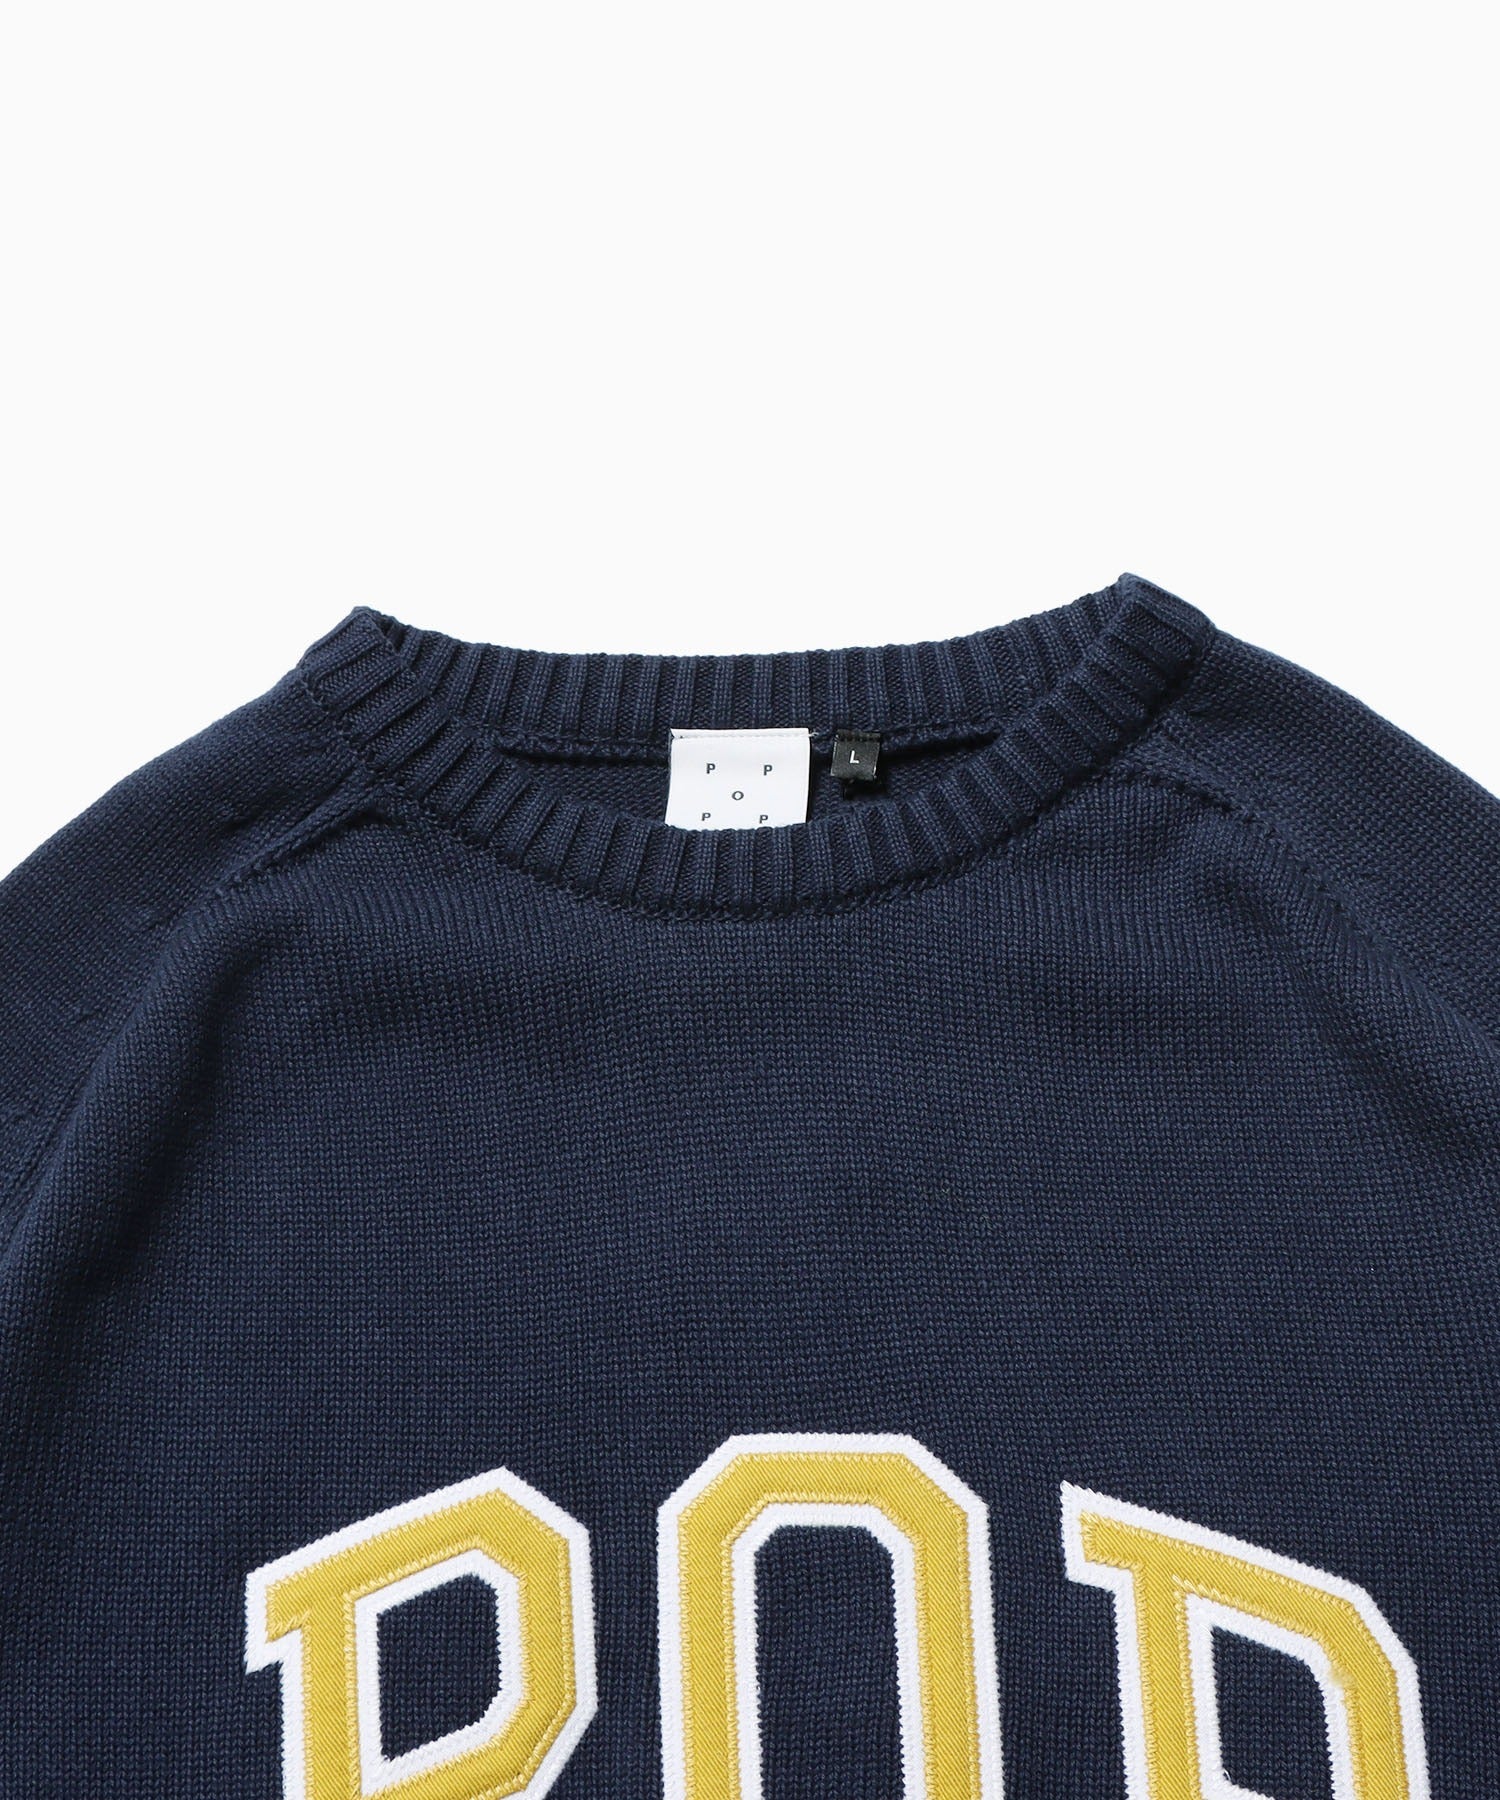 POP arch knitted crewneck